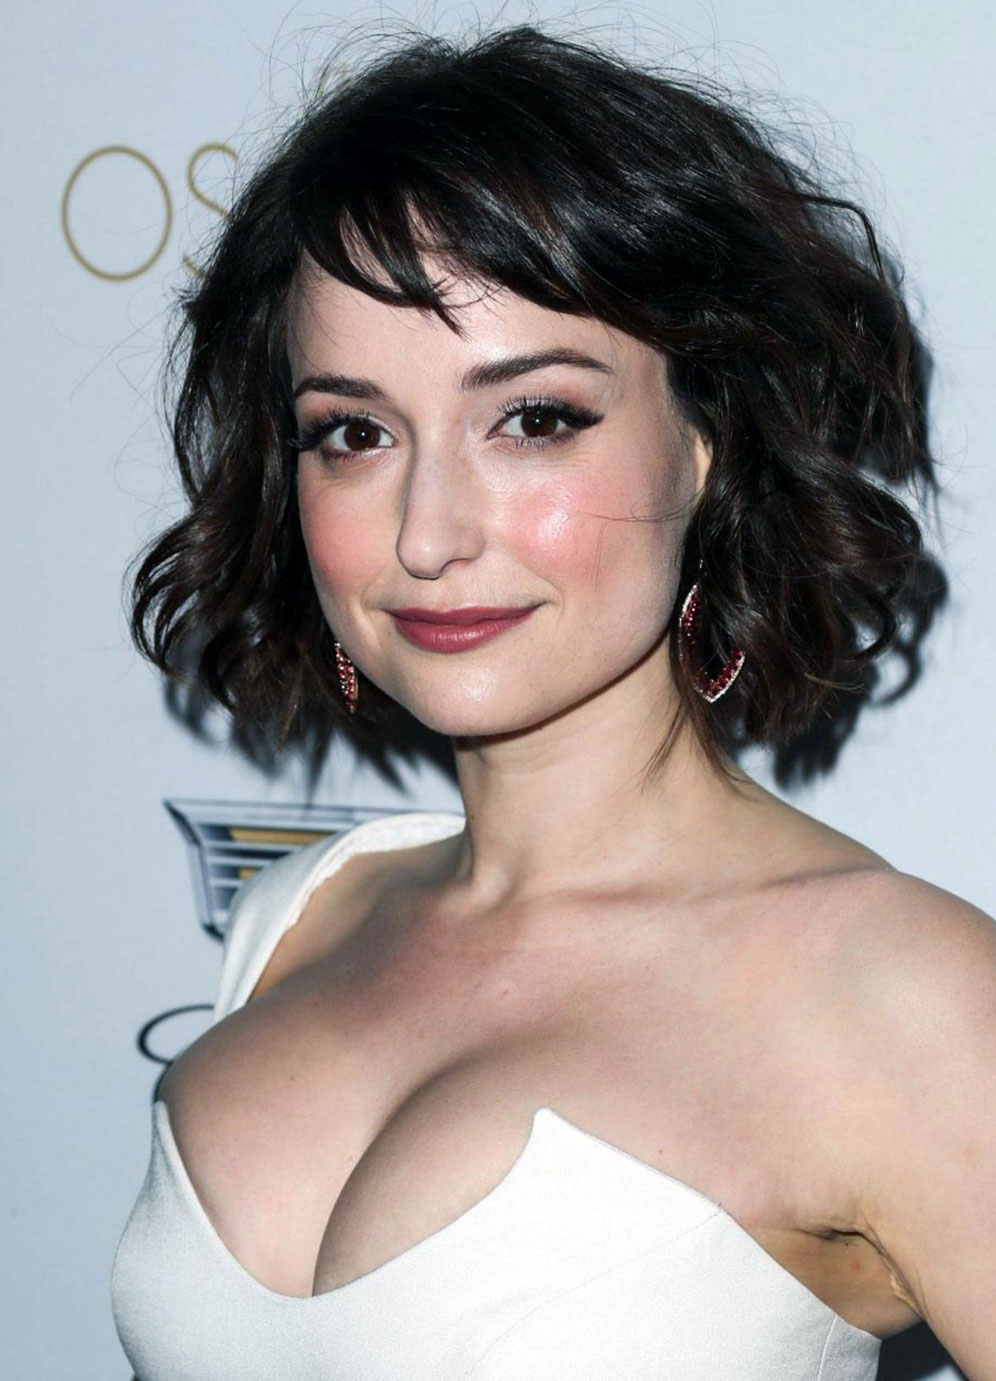 Milana Vayntrub nude leaked sexy topless hot naked cleavage45